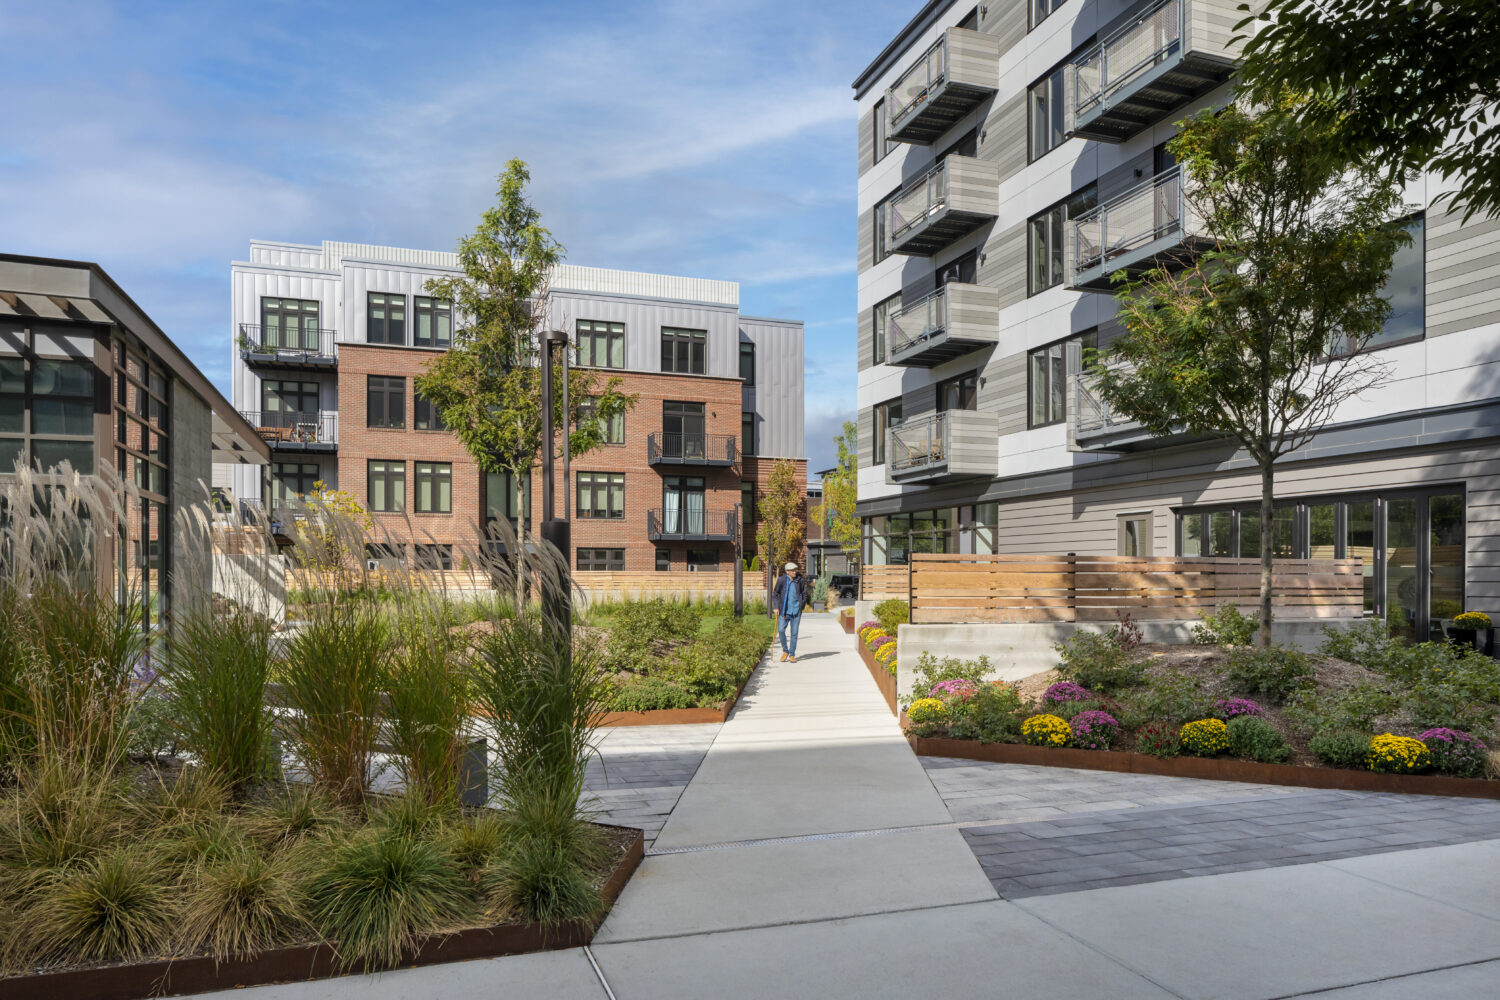 courtyard at Flats on First, with a sidewalk and trees in the center 